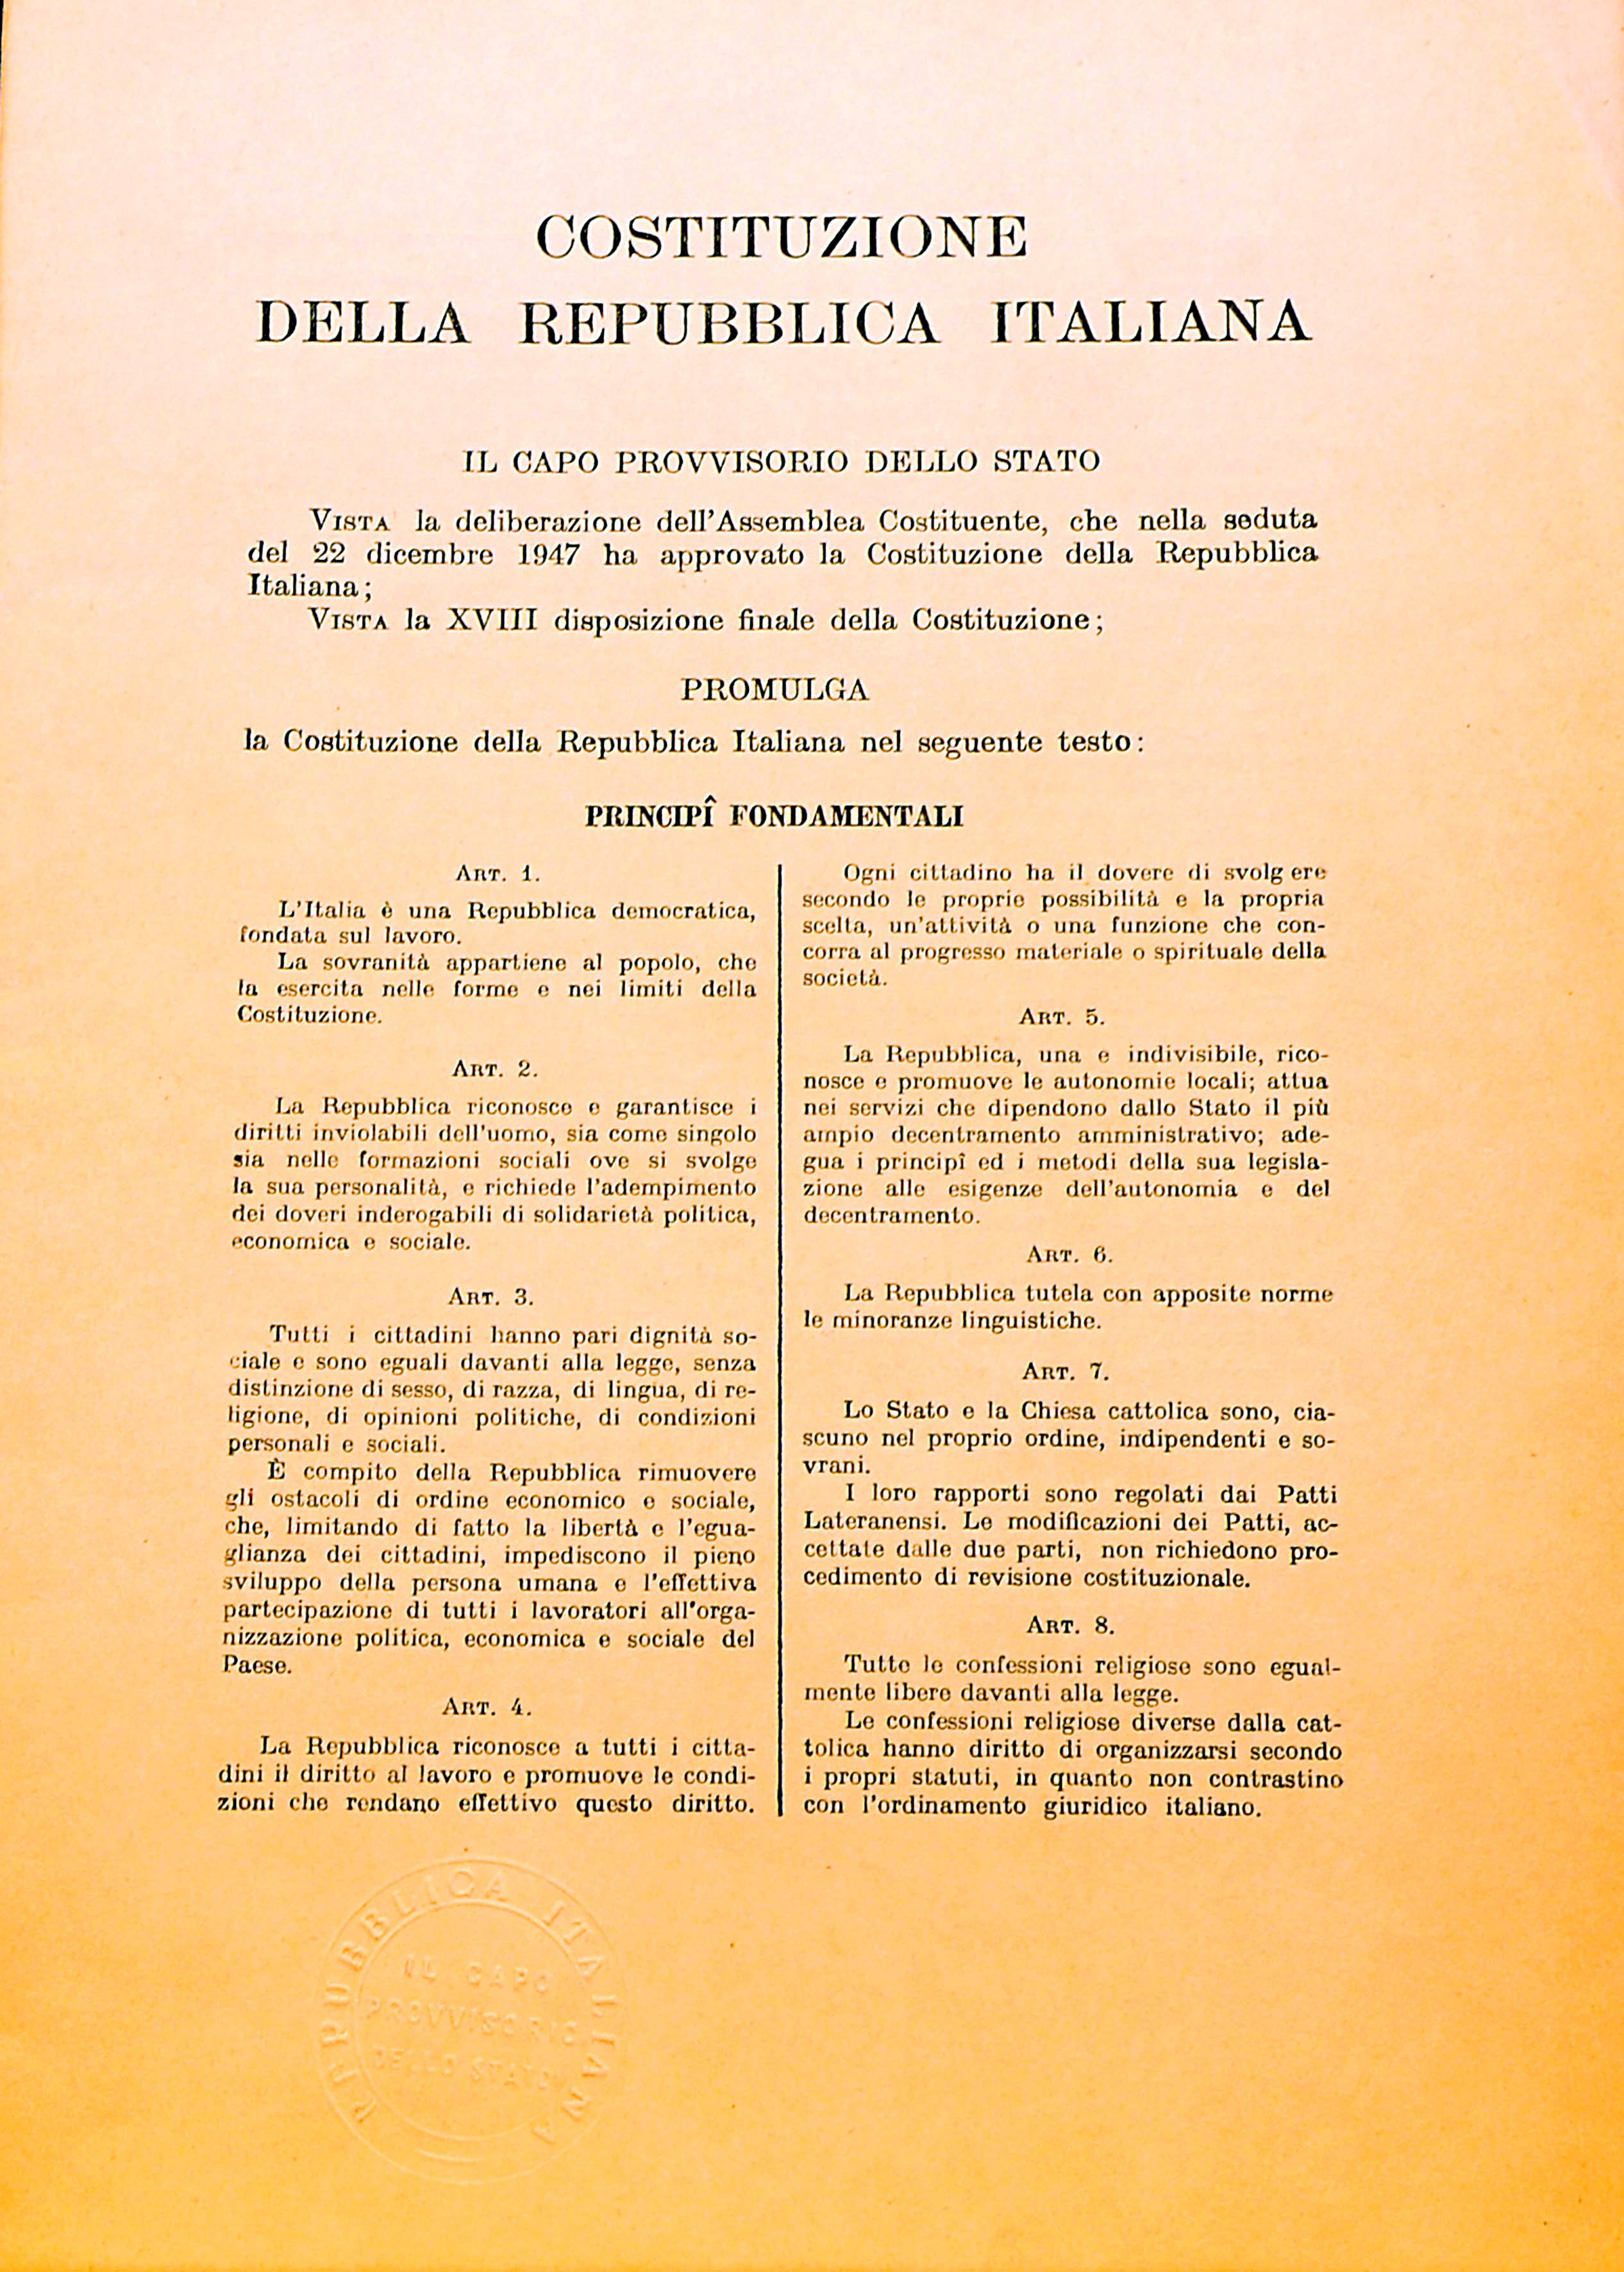 First page of the Constitution of the Italian Republic